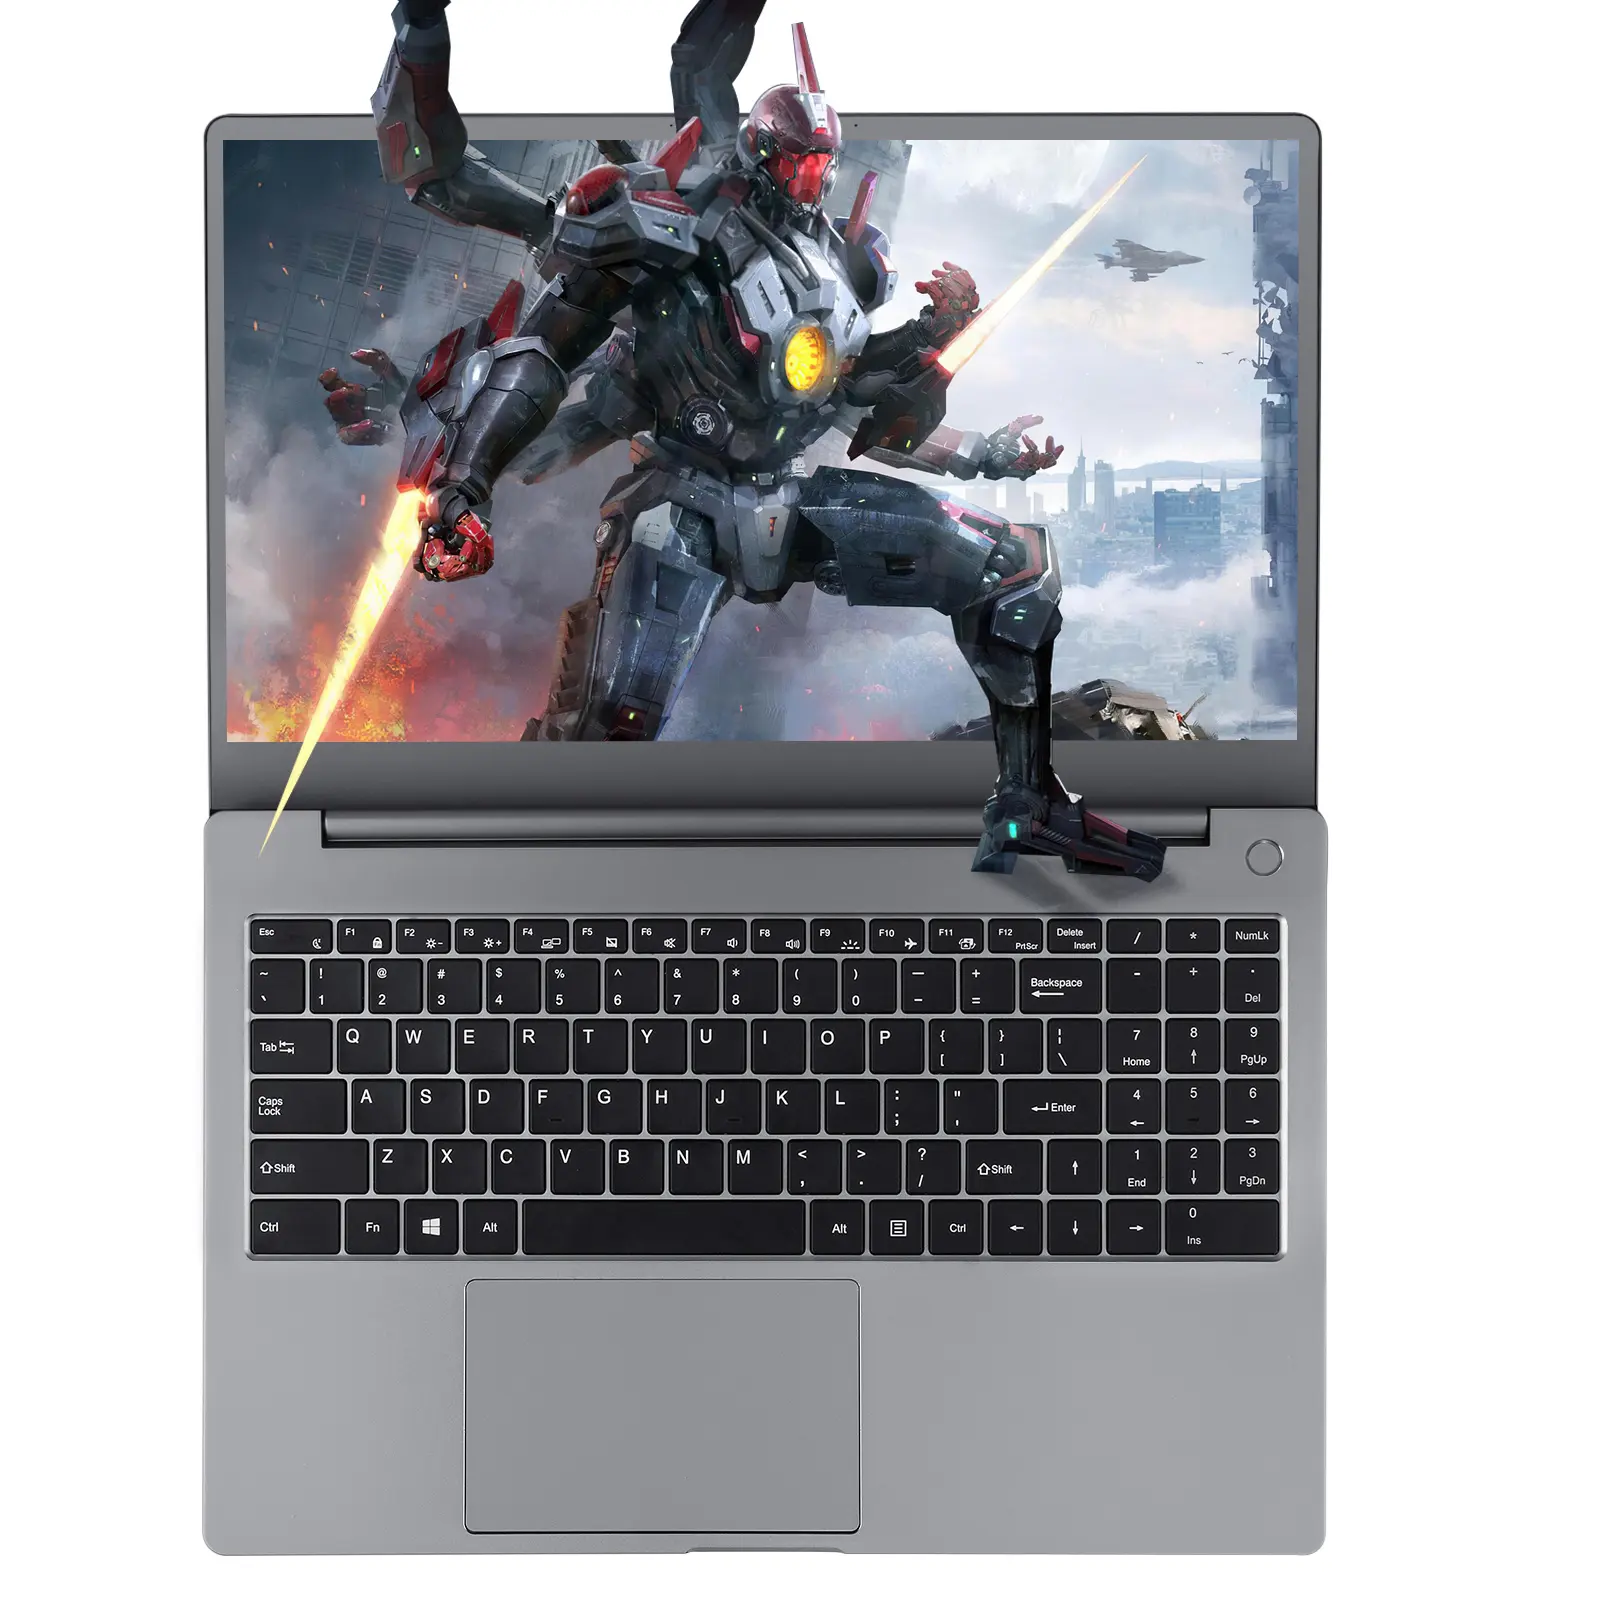 2022 welcomed stocked high definition fast delivery core i5 10gen 11th gen msi gaming laptop